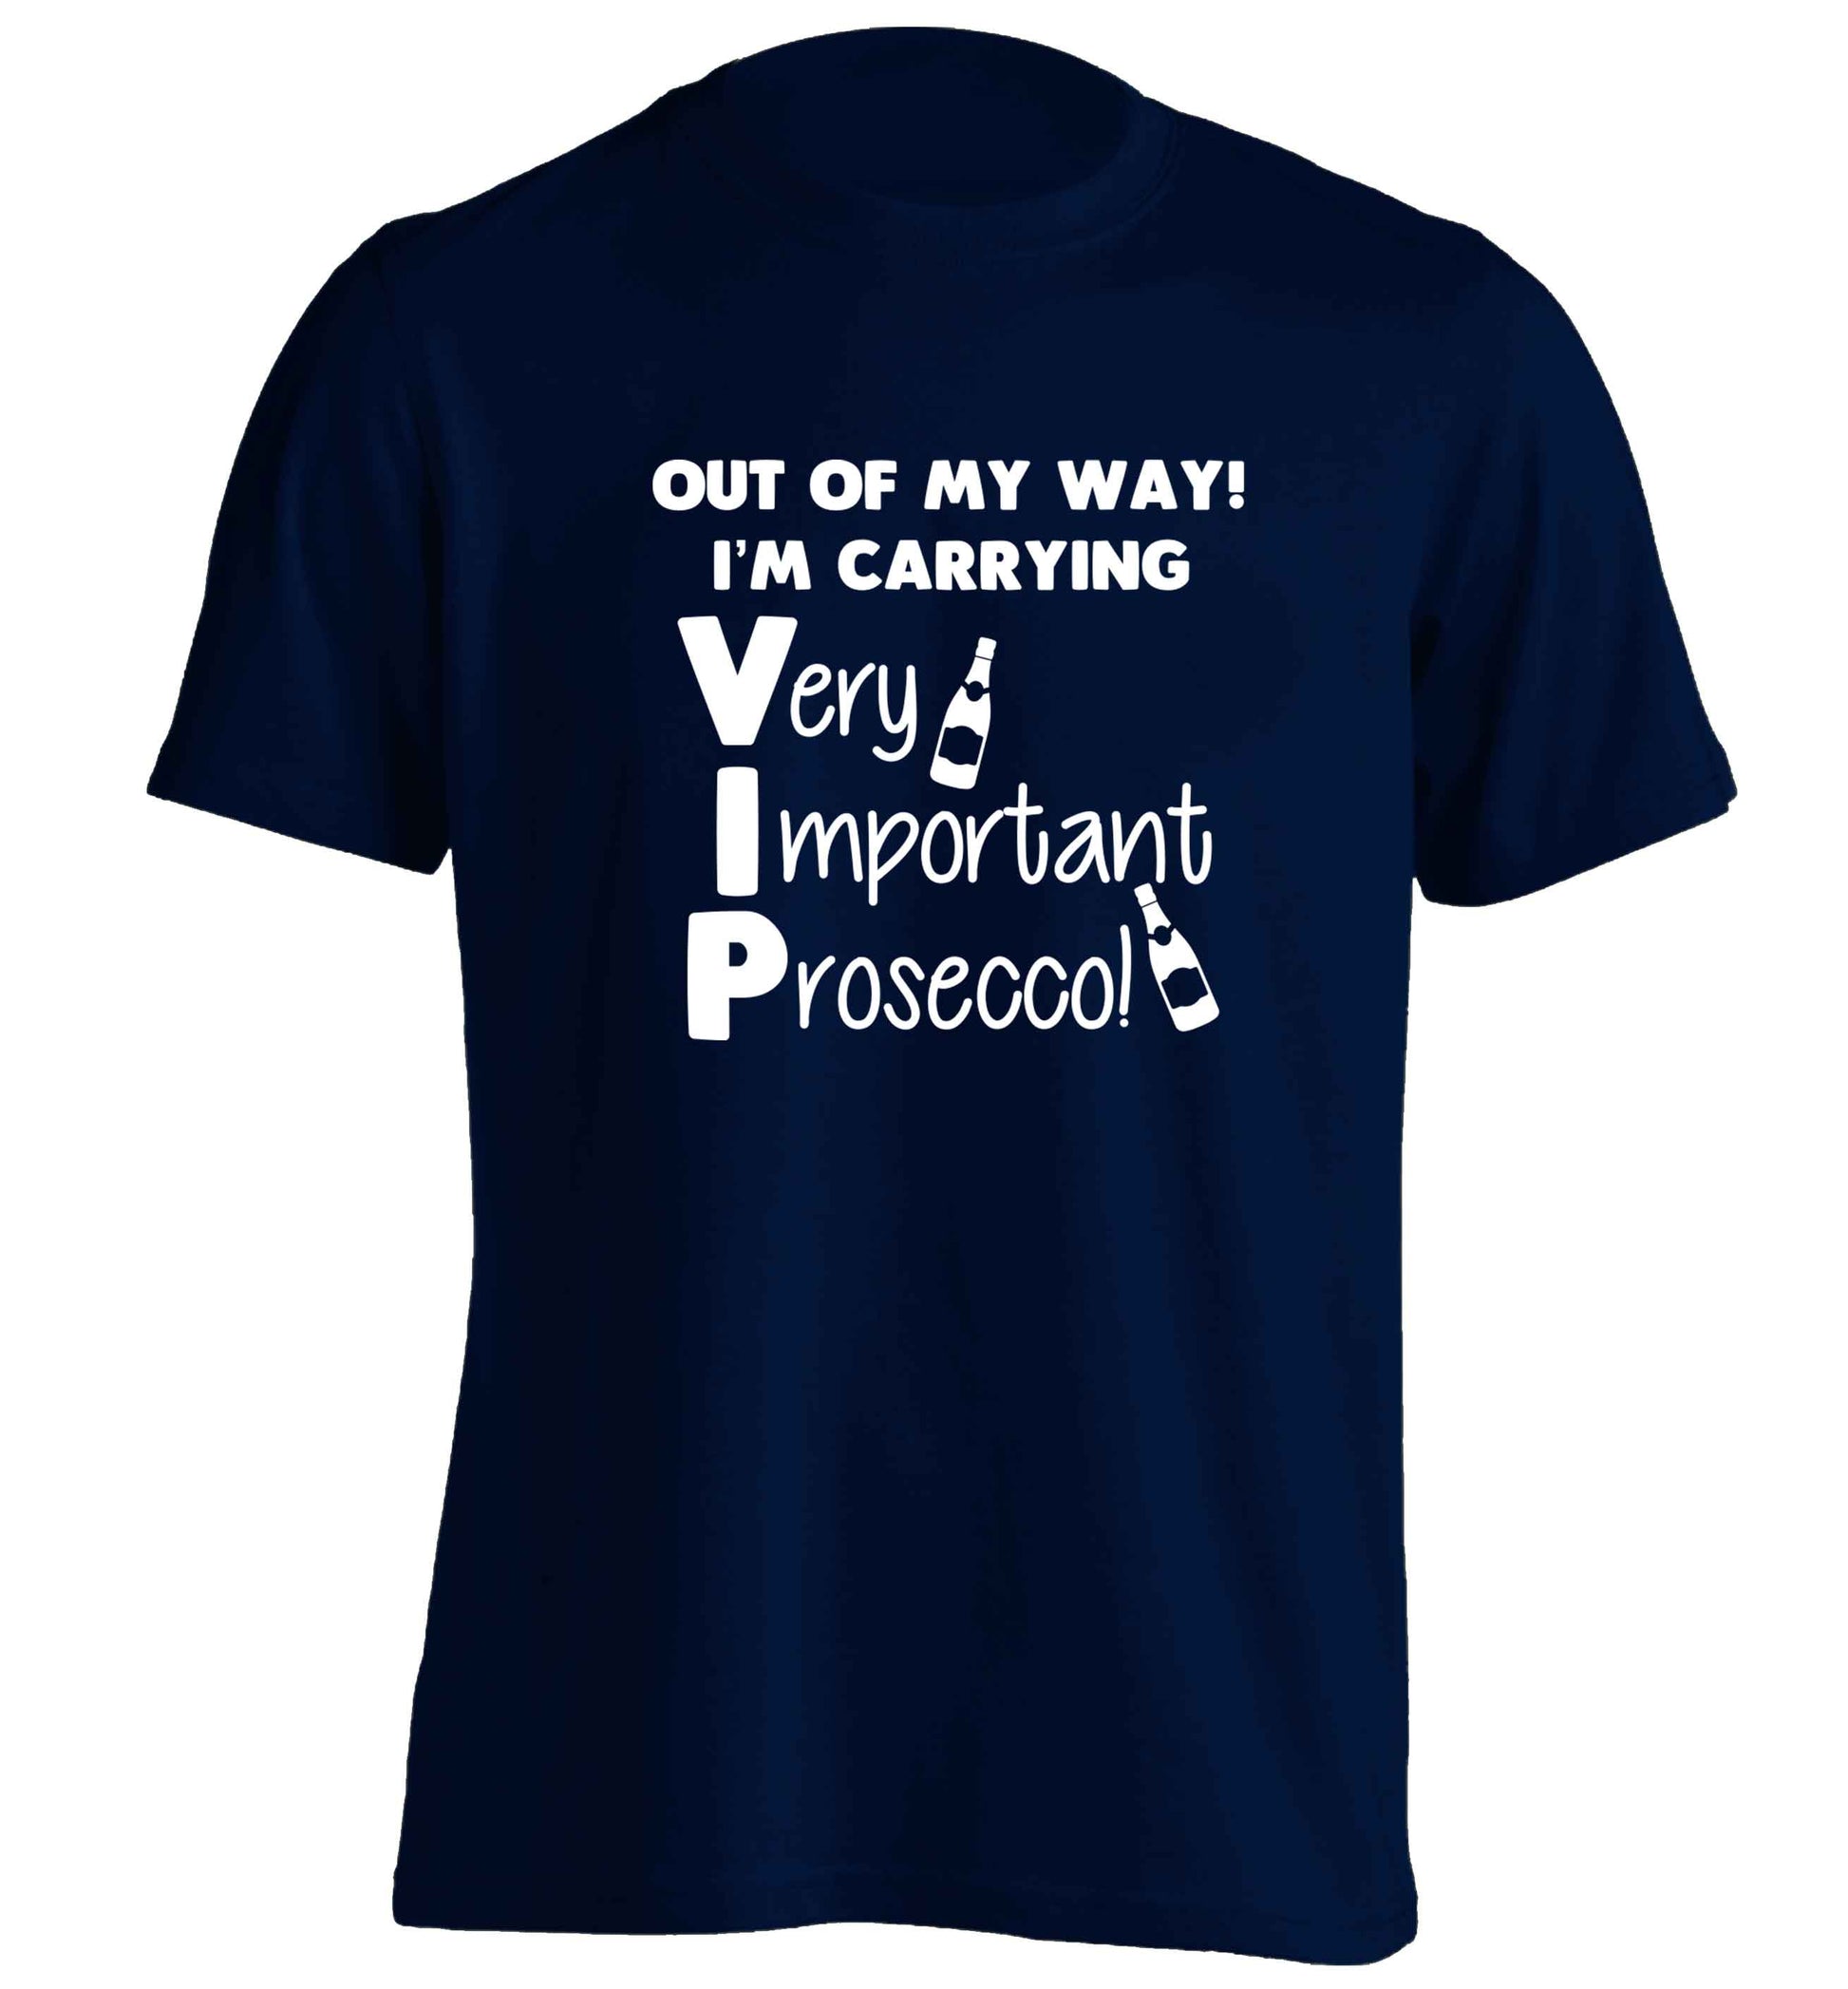 Out of my way I'm carrying very important prosecco! adults unisex navy Tshirt 2XL